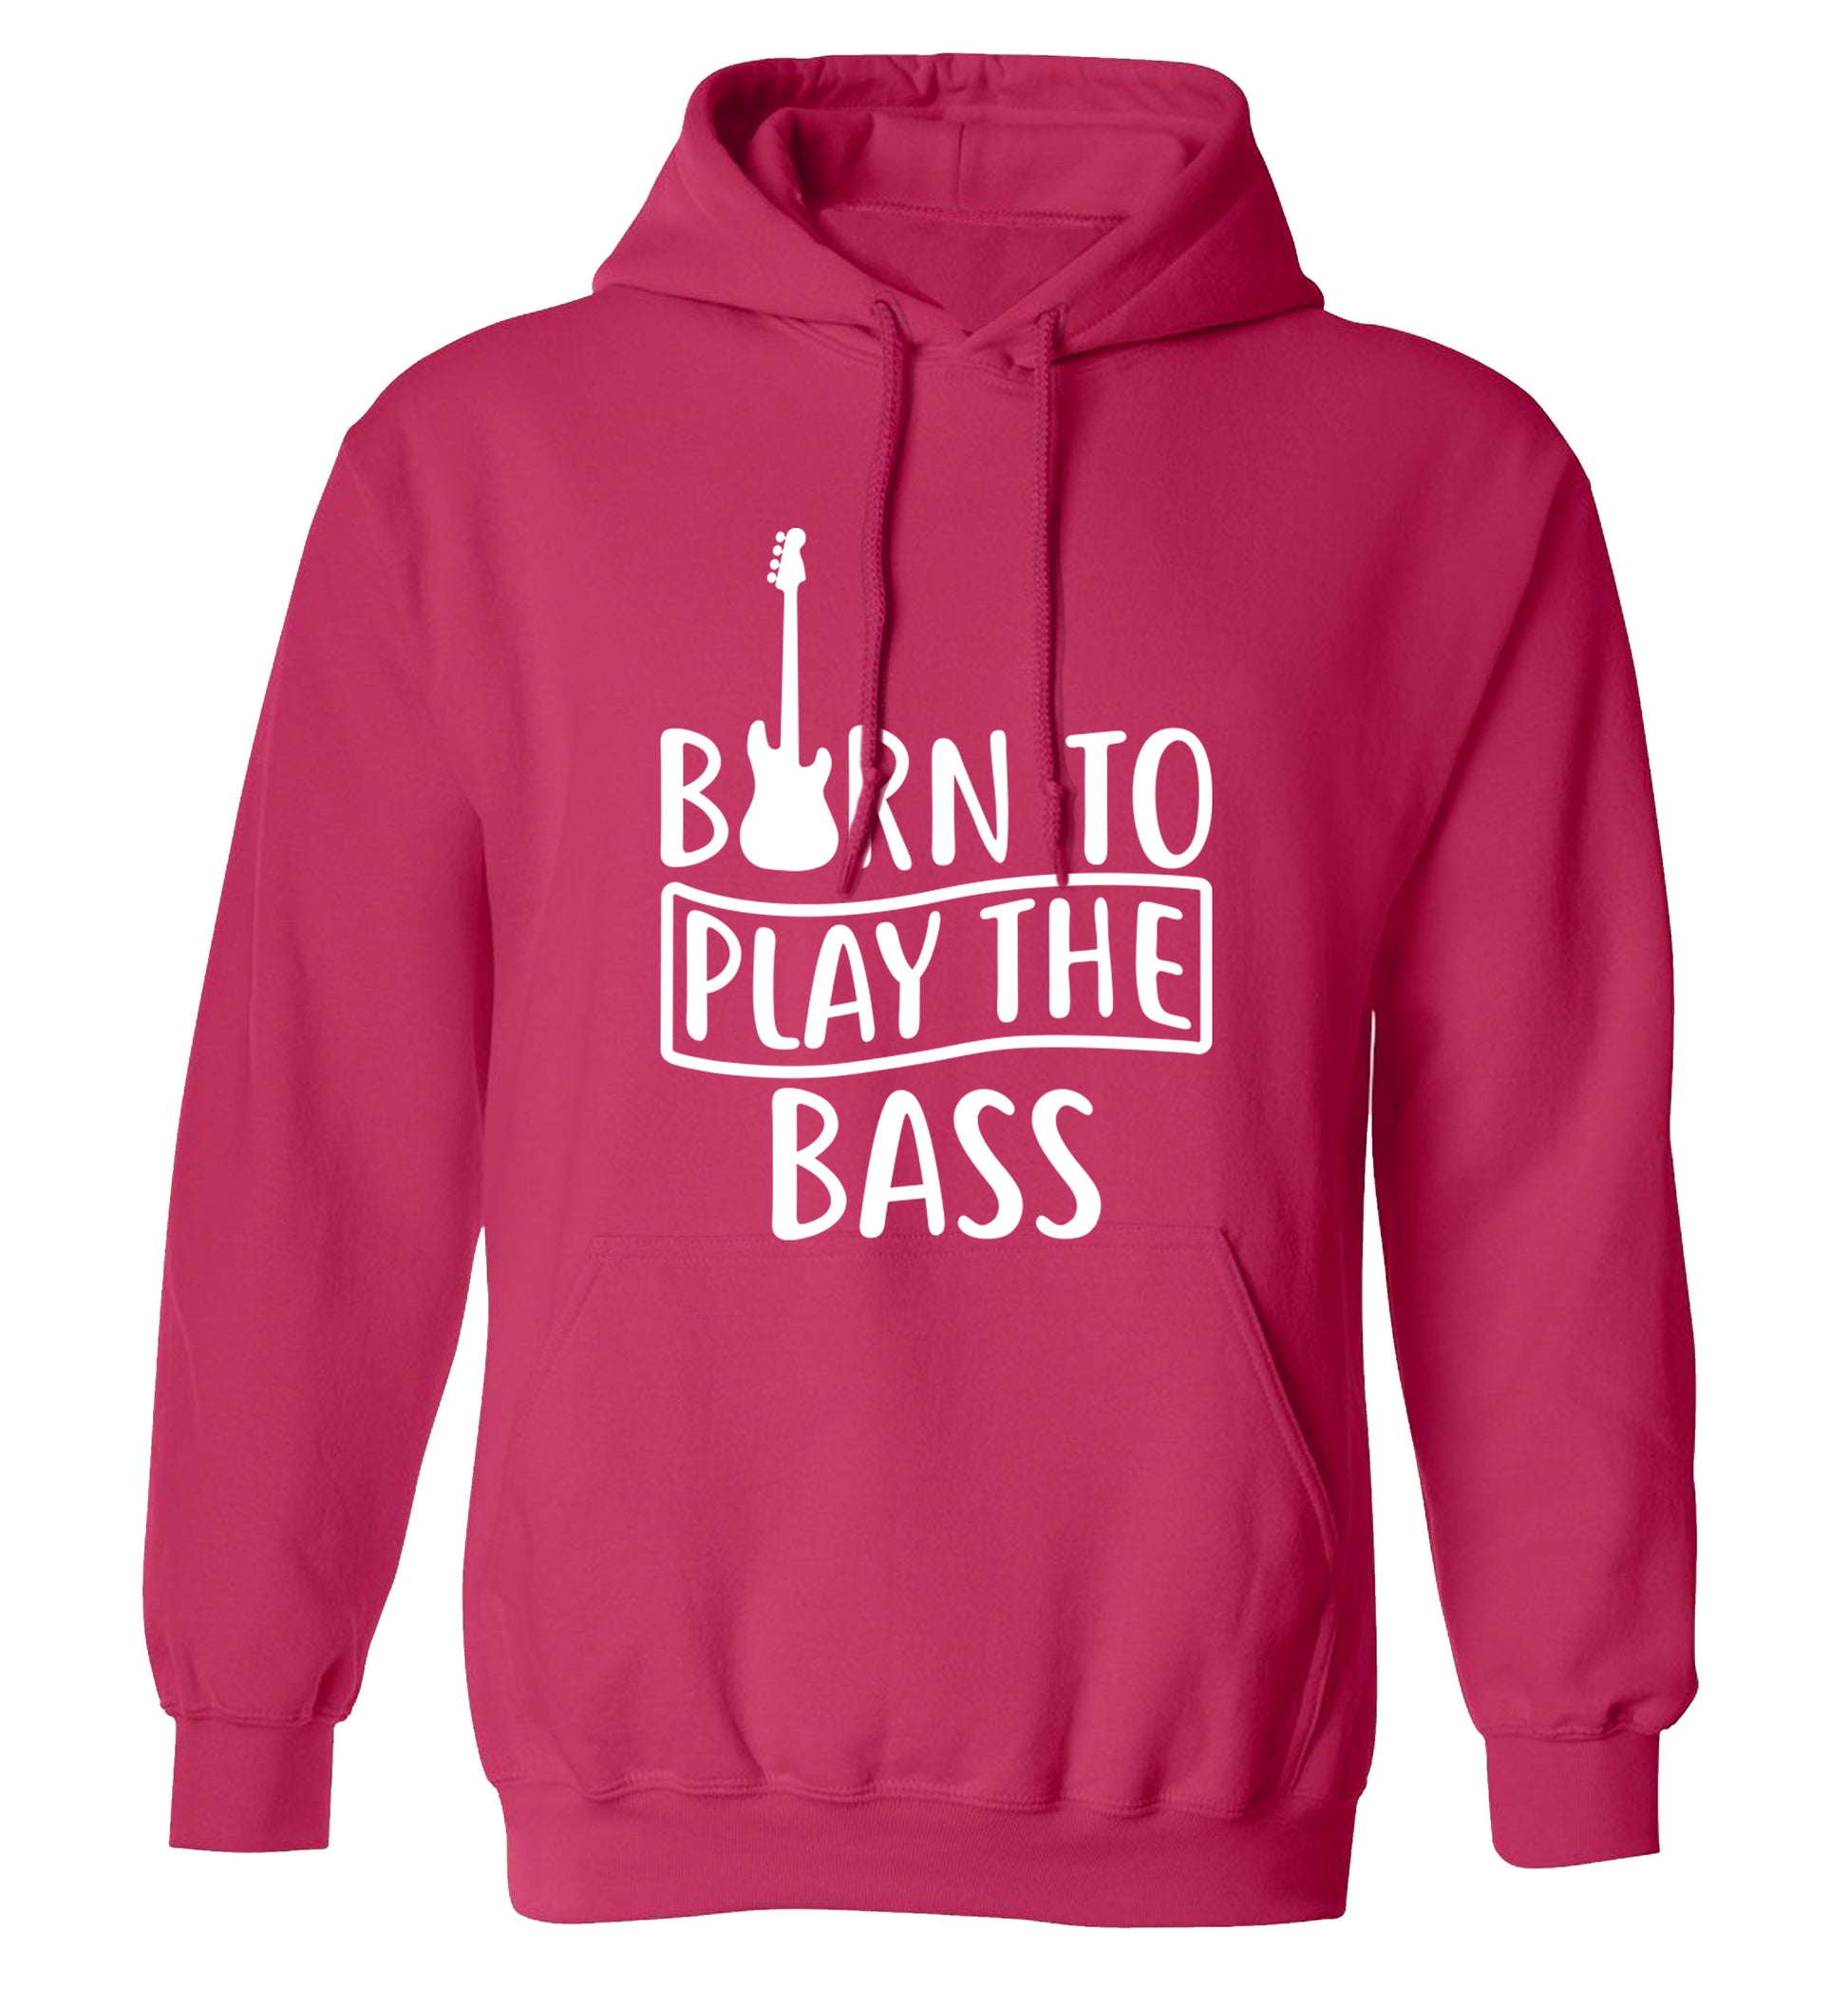 Born to play the bass adults unisex pink hoodie 2XL